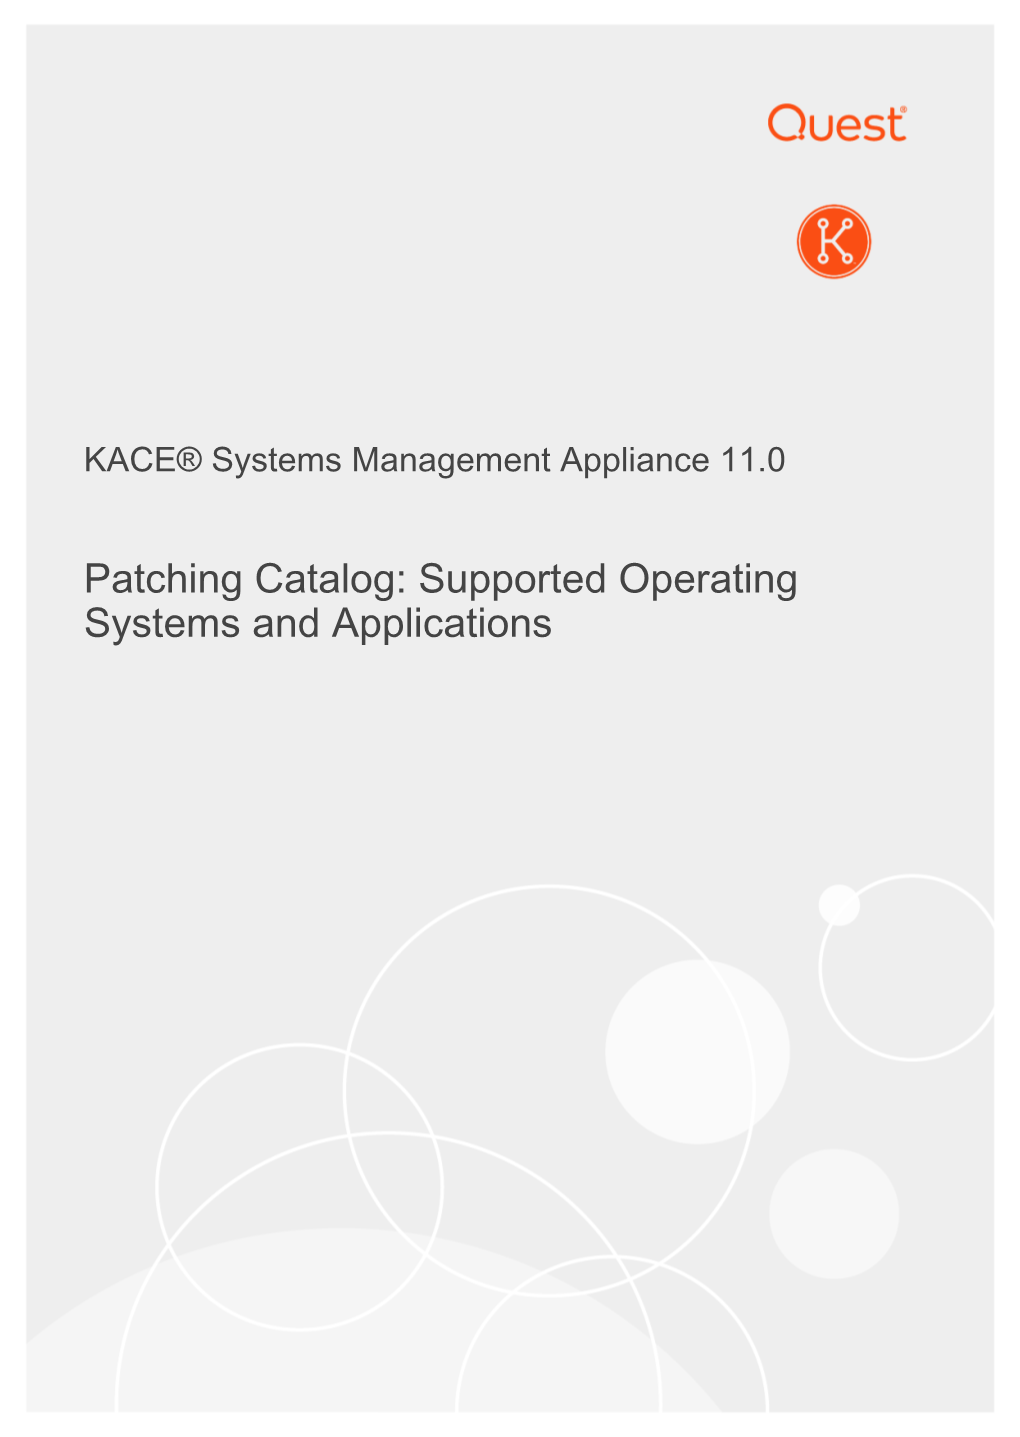 KACE® Systems Management Appliance 11.0 Patching Catalog